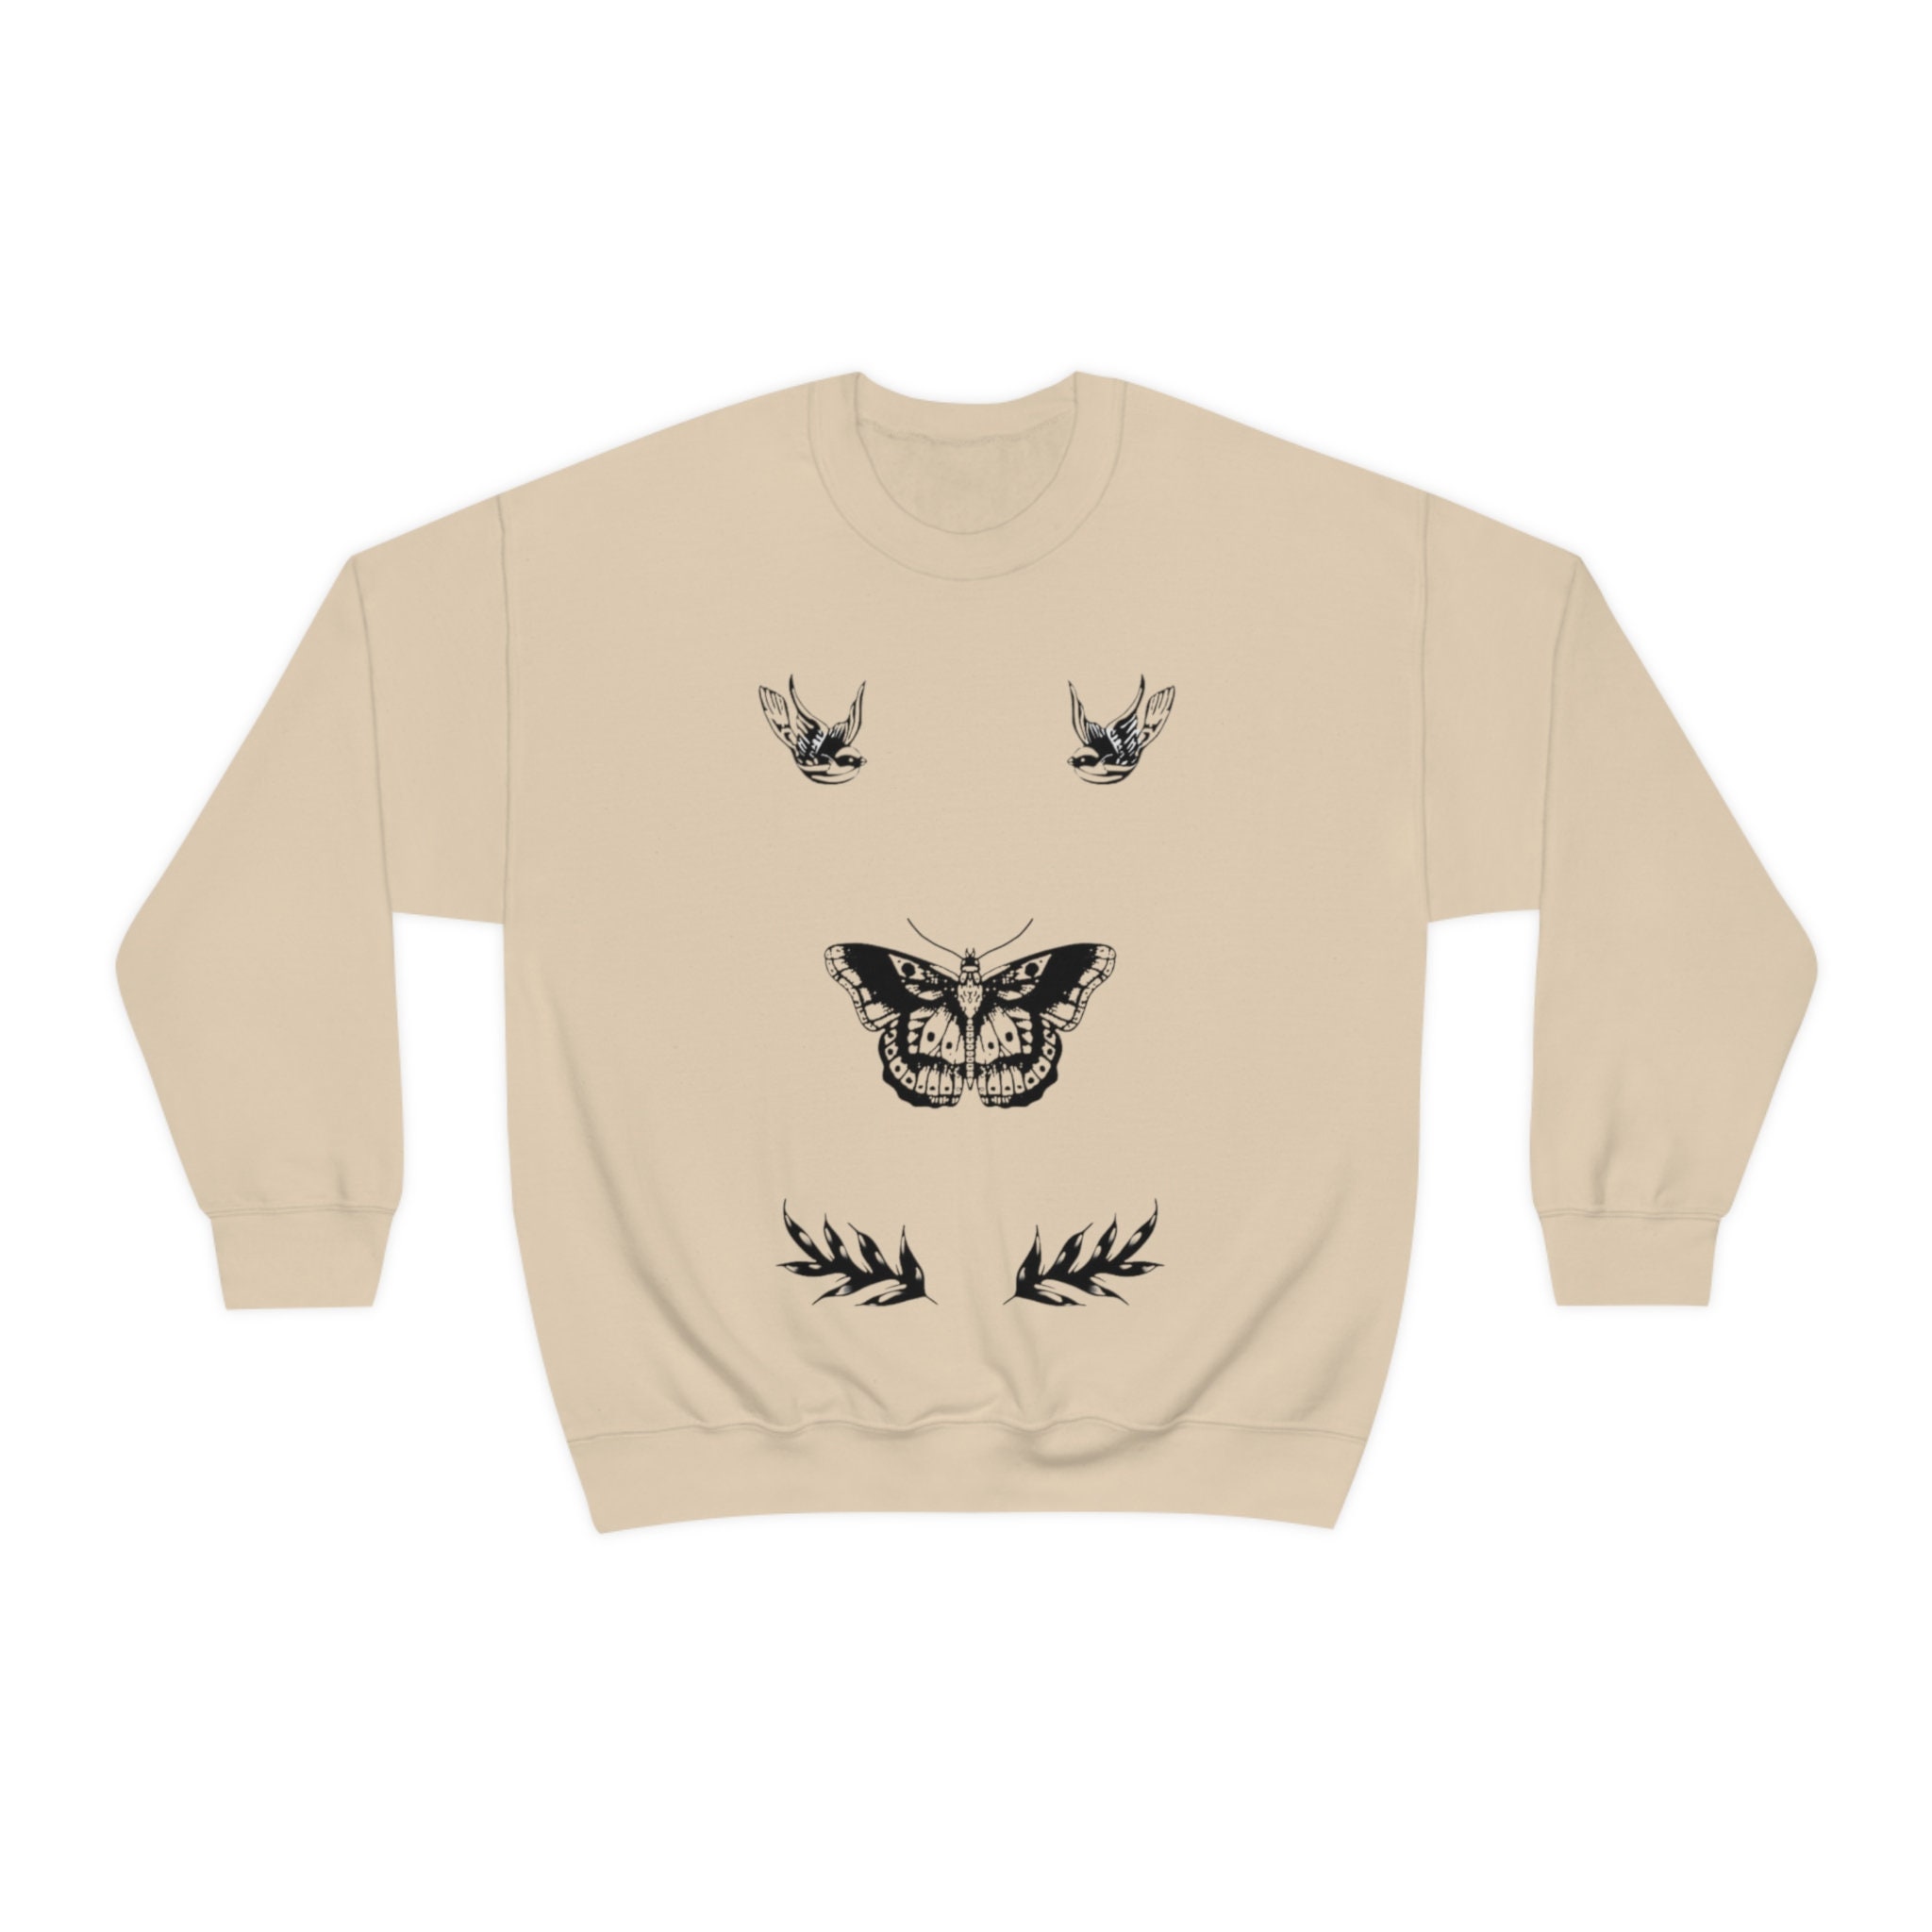 Aggregate 89 about harry styles tattoo sweater india super cool   indaotaonec